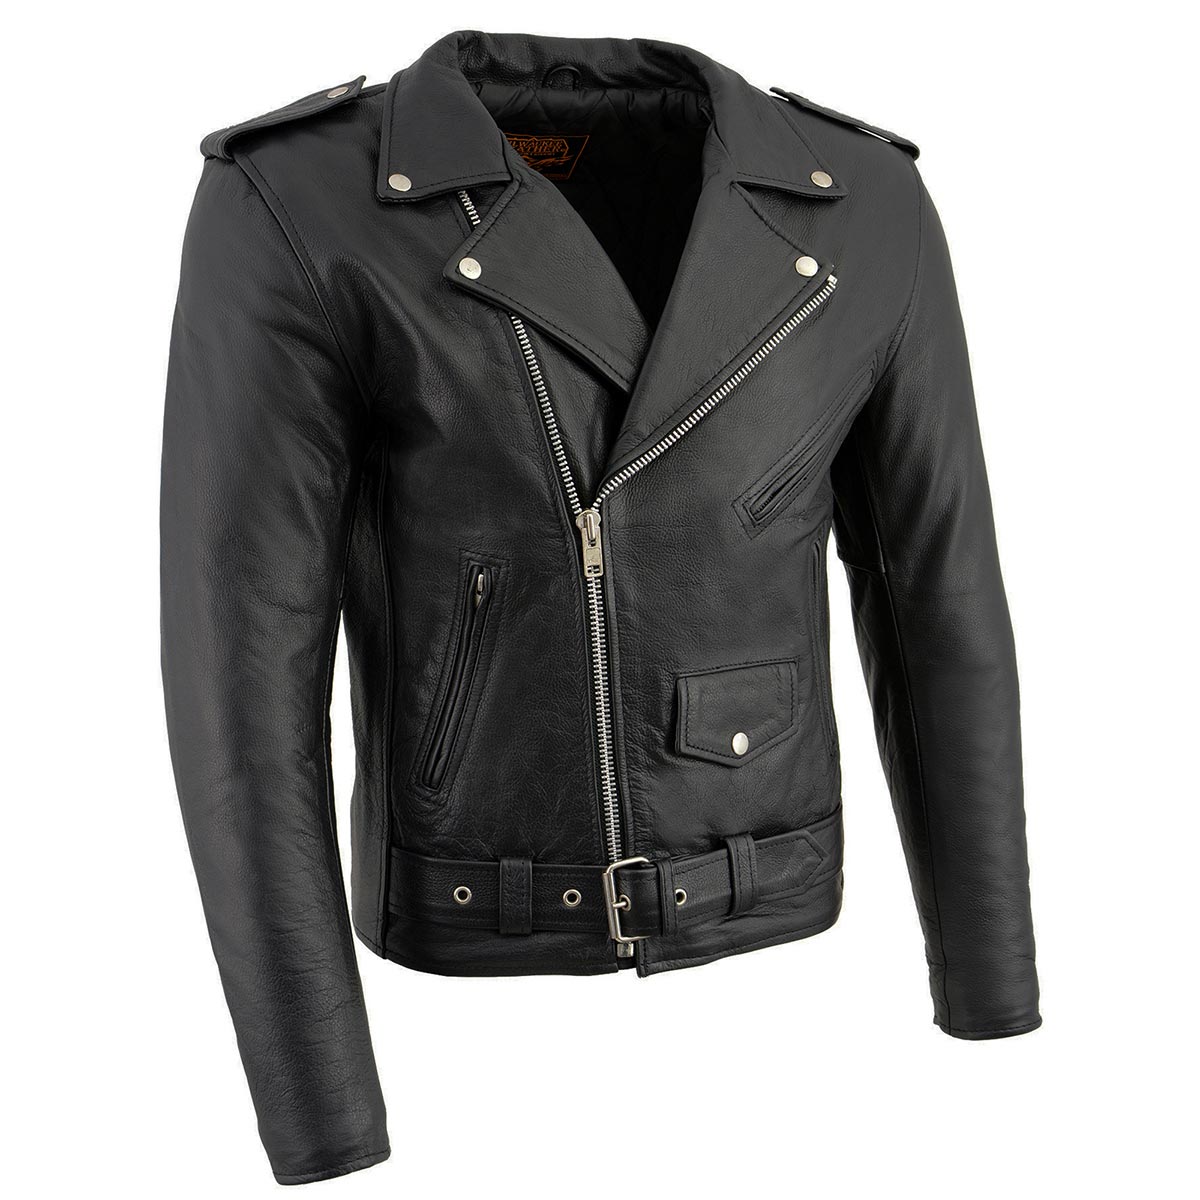 Men's “The Legend” Classic Police Style Black Leather Motorcycle Jacket